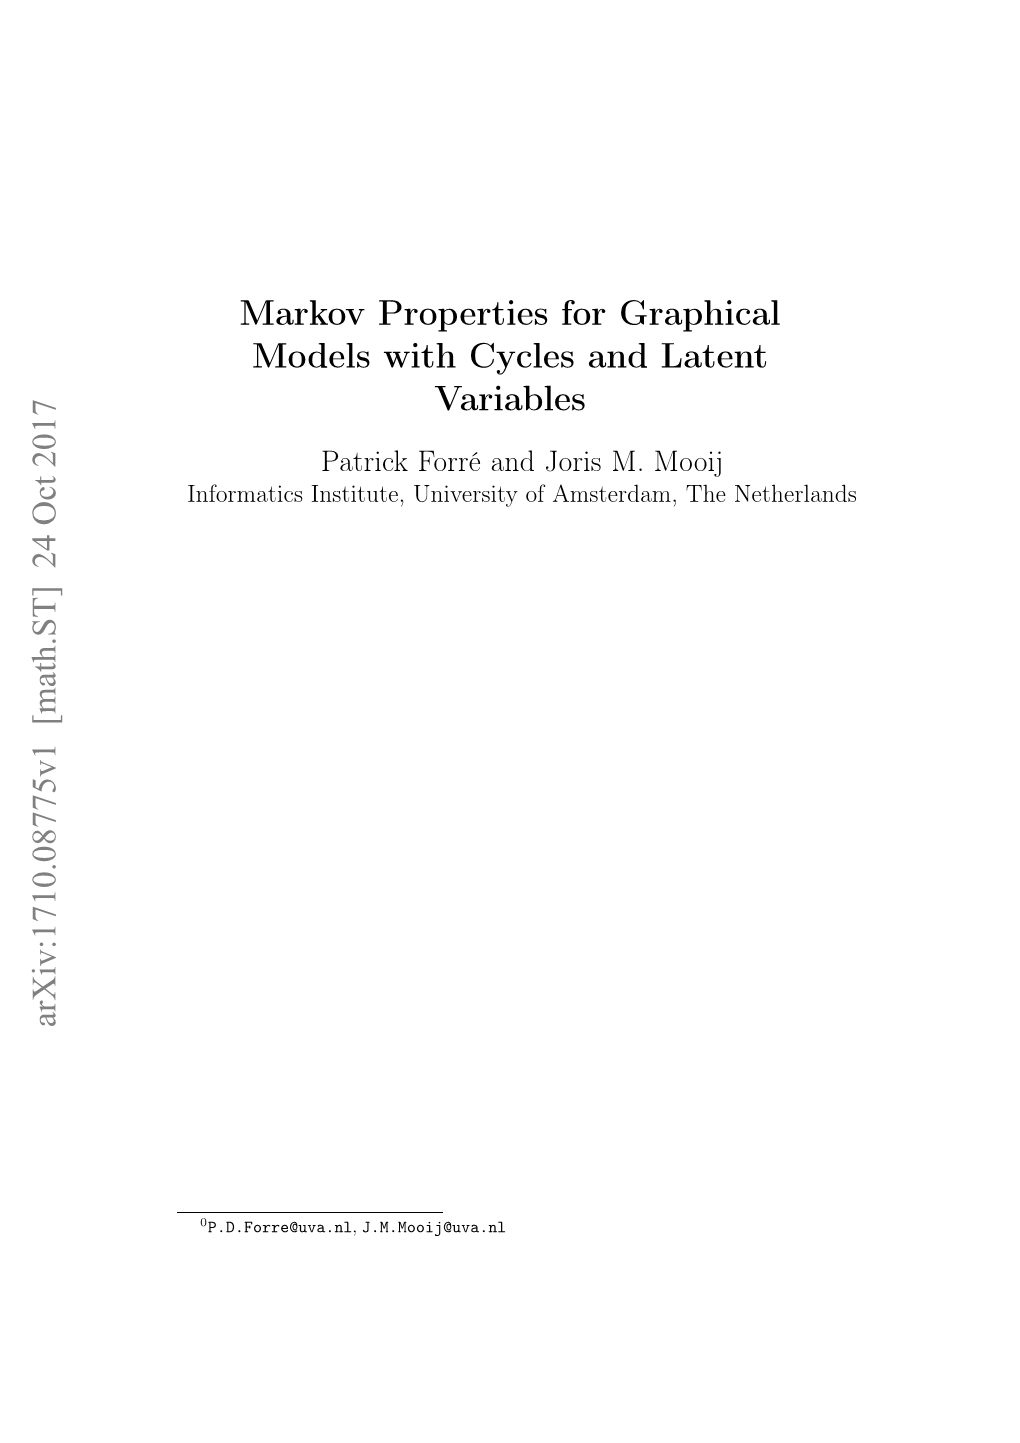 Markov Properties for Graphical Models with Cycles and Latent